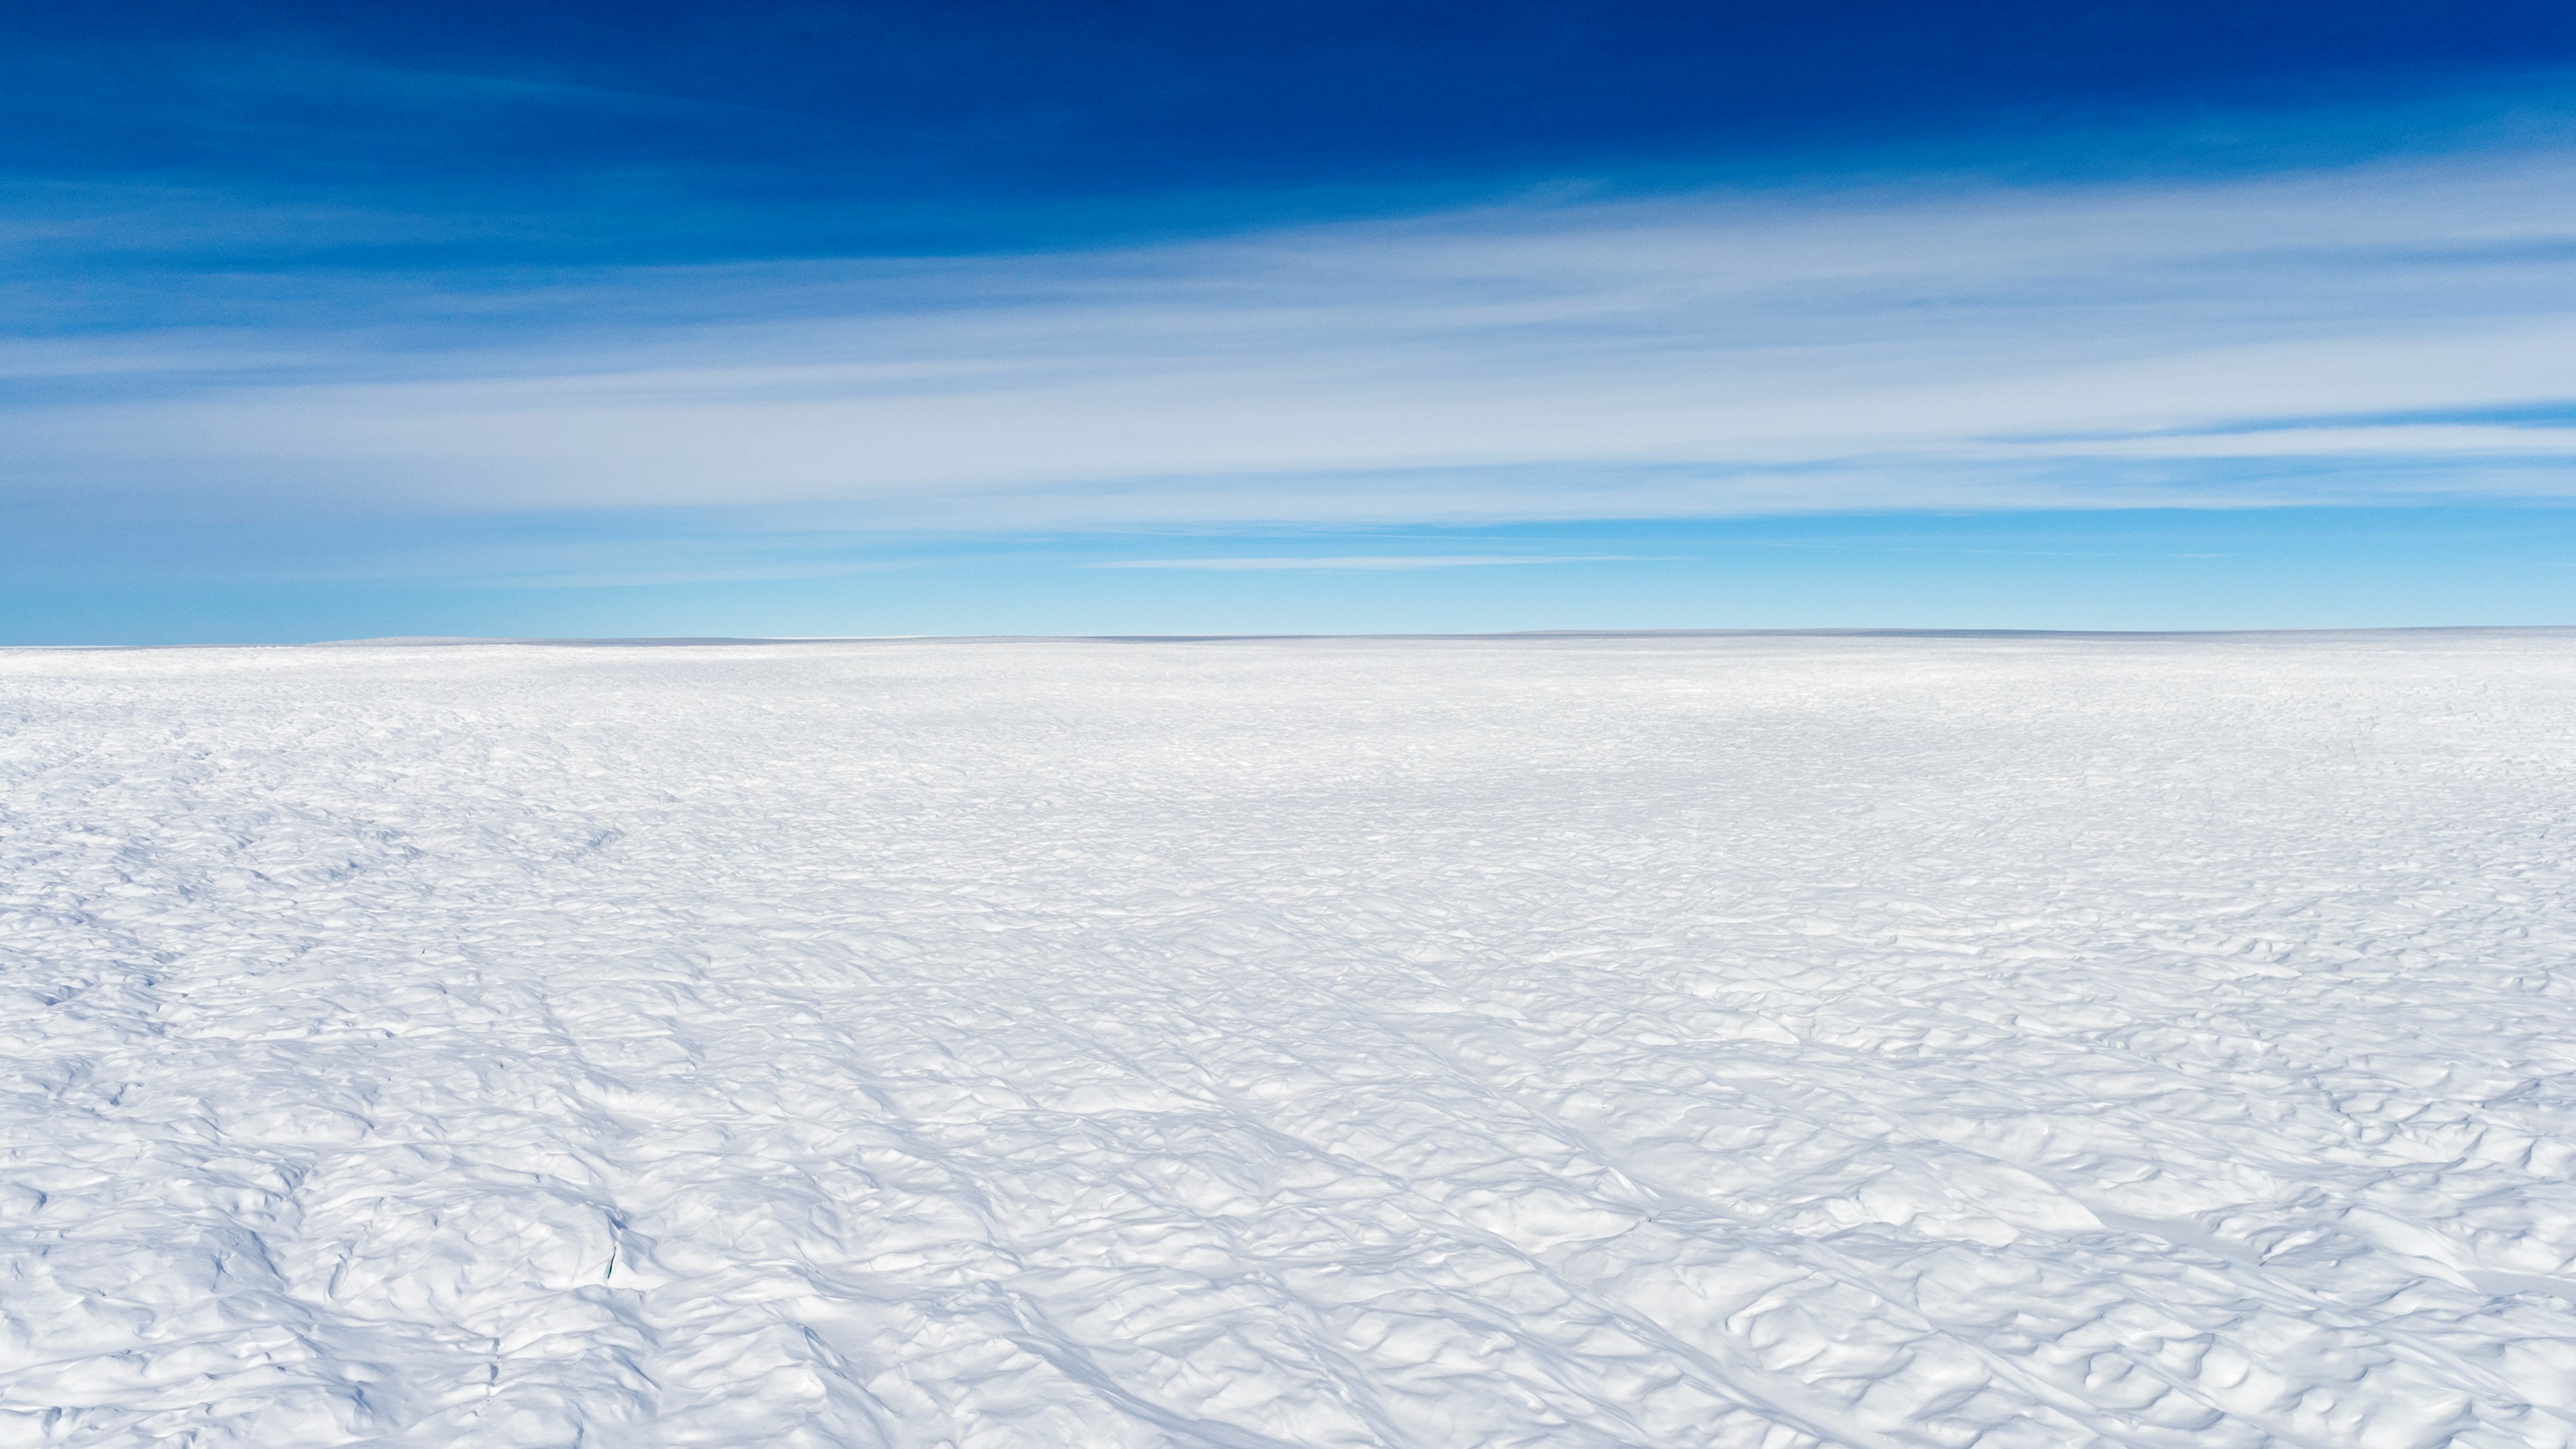 The vast Greenland Ice Sheet plain on a clear day